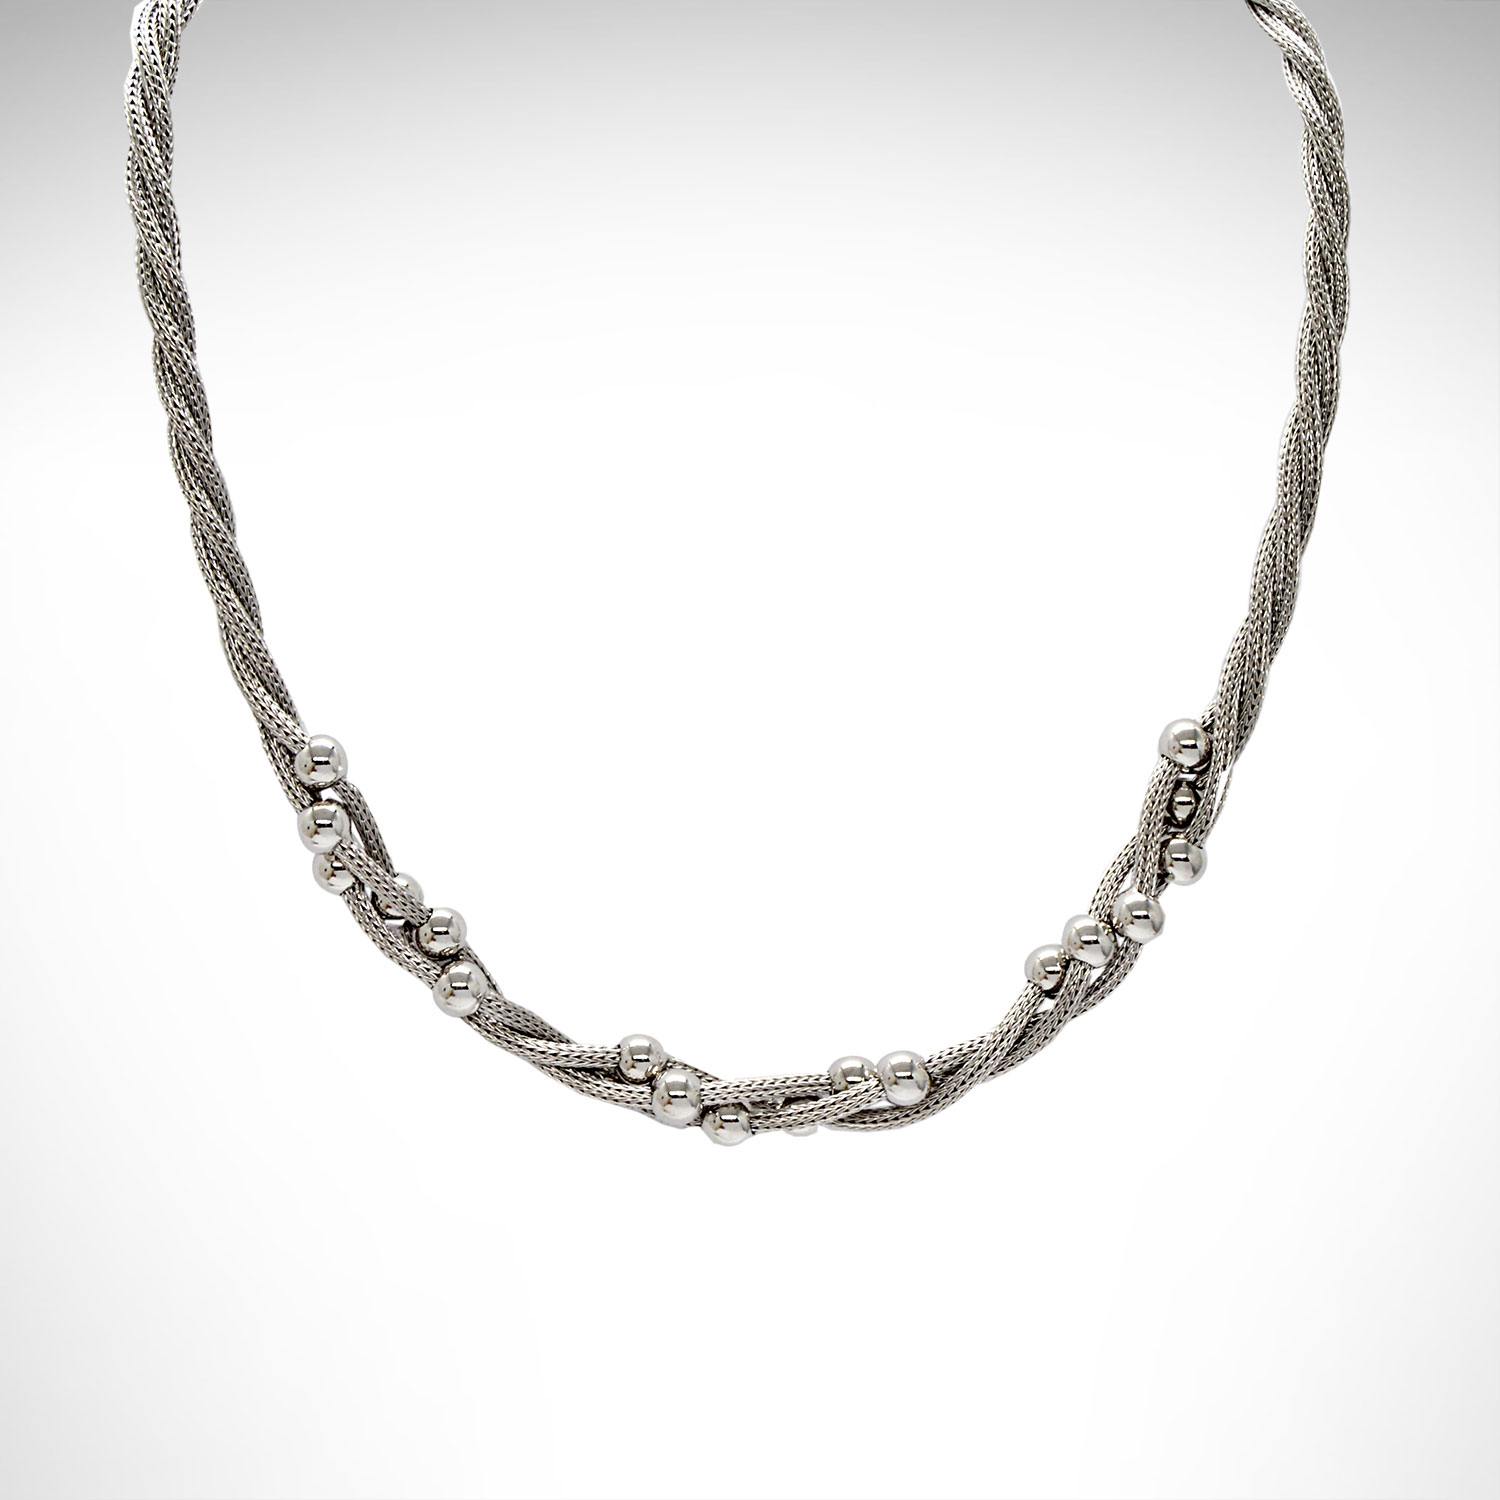 sterling silver necklace with polished beads twisted into woven sterling wire.